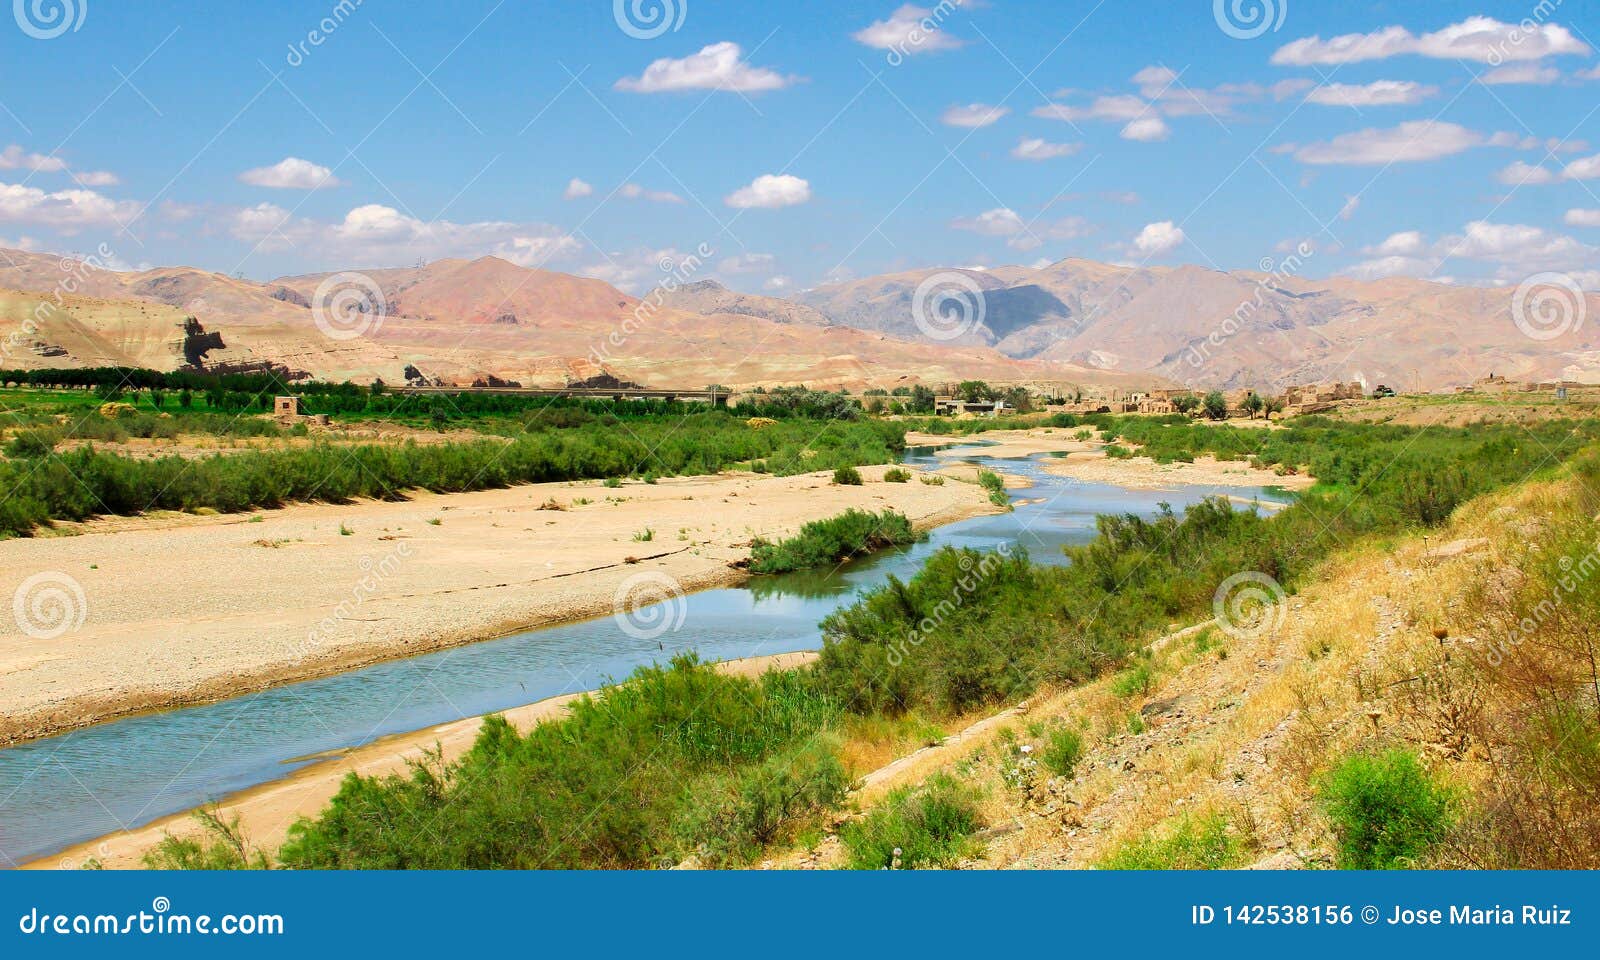 River In The Middle Of The Desert Of Iran With Mountains And Grass And The Horizont With Cloudy Sky Stock Photo Image Of Wild Exploration